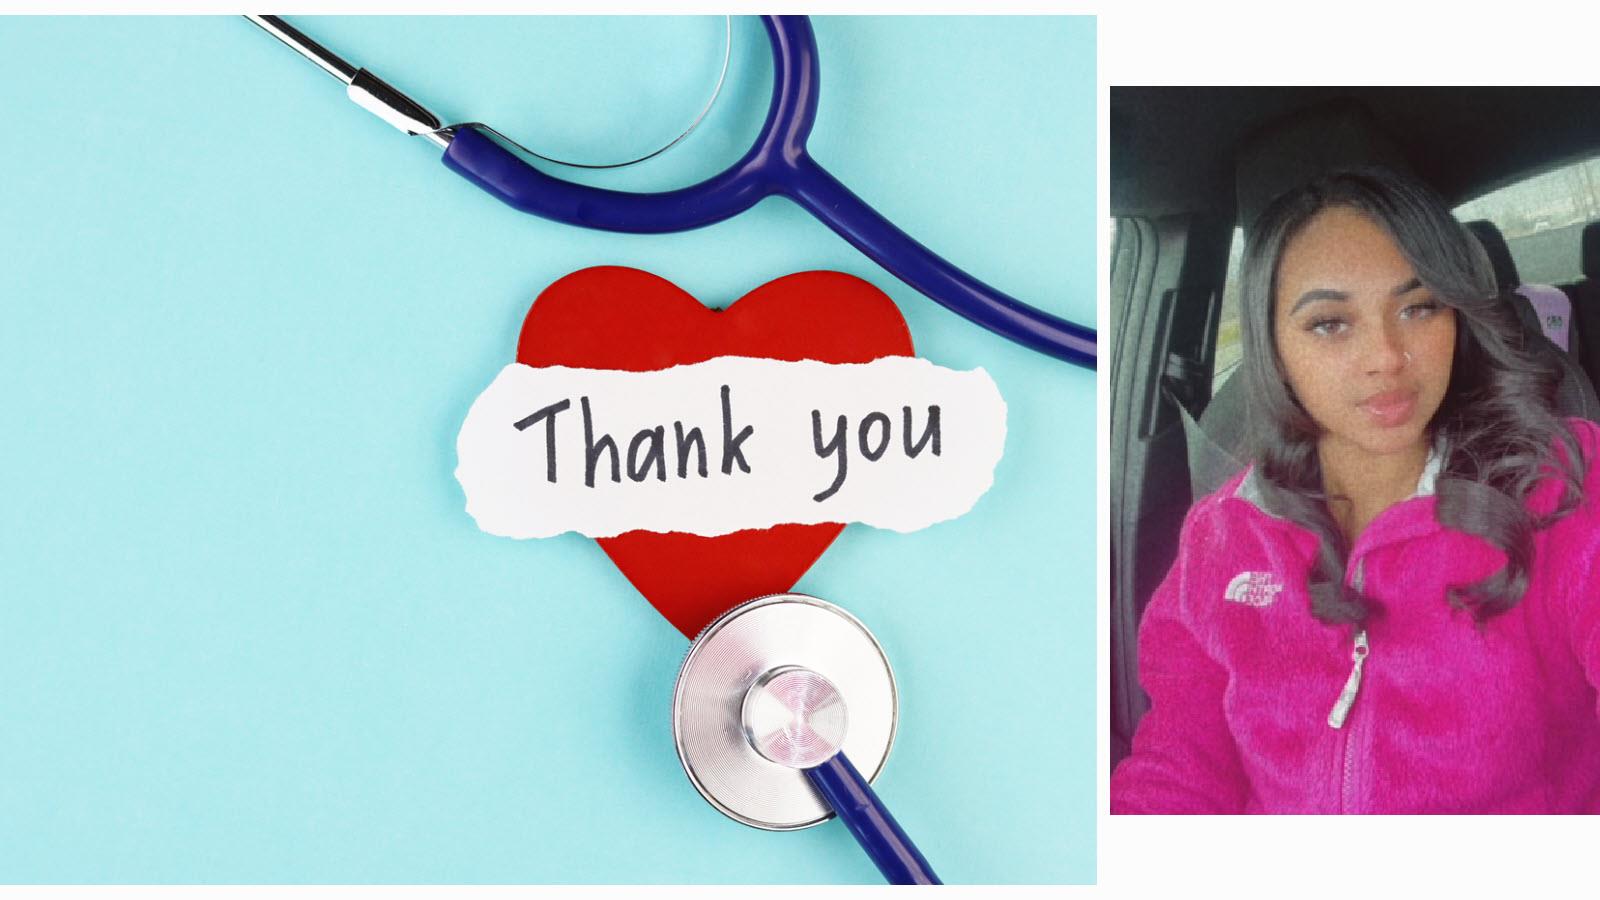 Nurse Zion with thank you stethoscope message